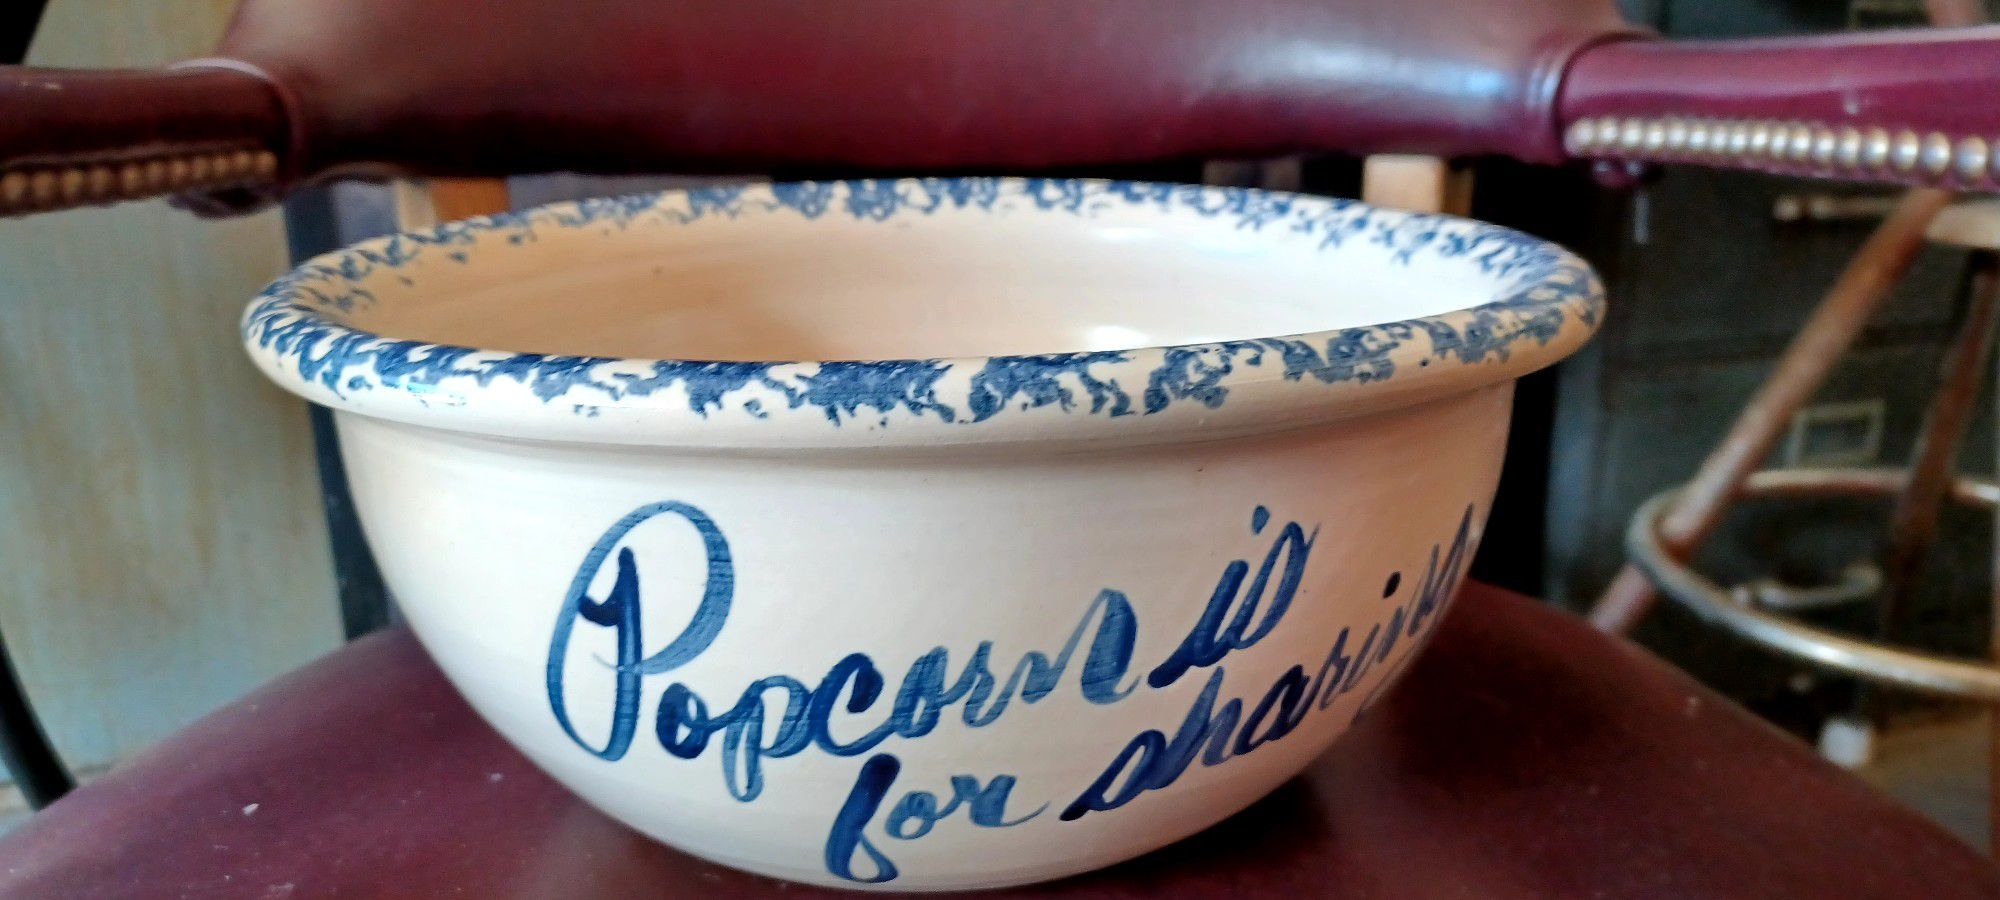 Large Popcorn Bowl Says Popcorn Is For Sharing And That's All Folks